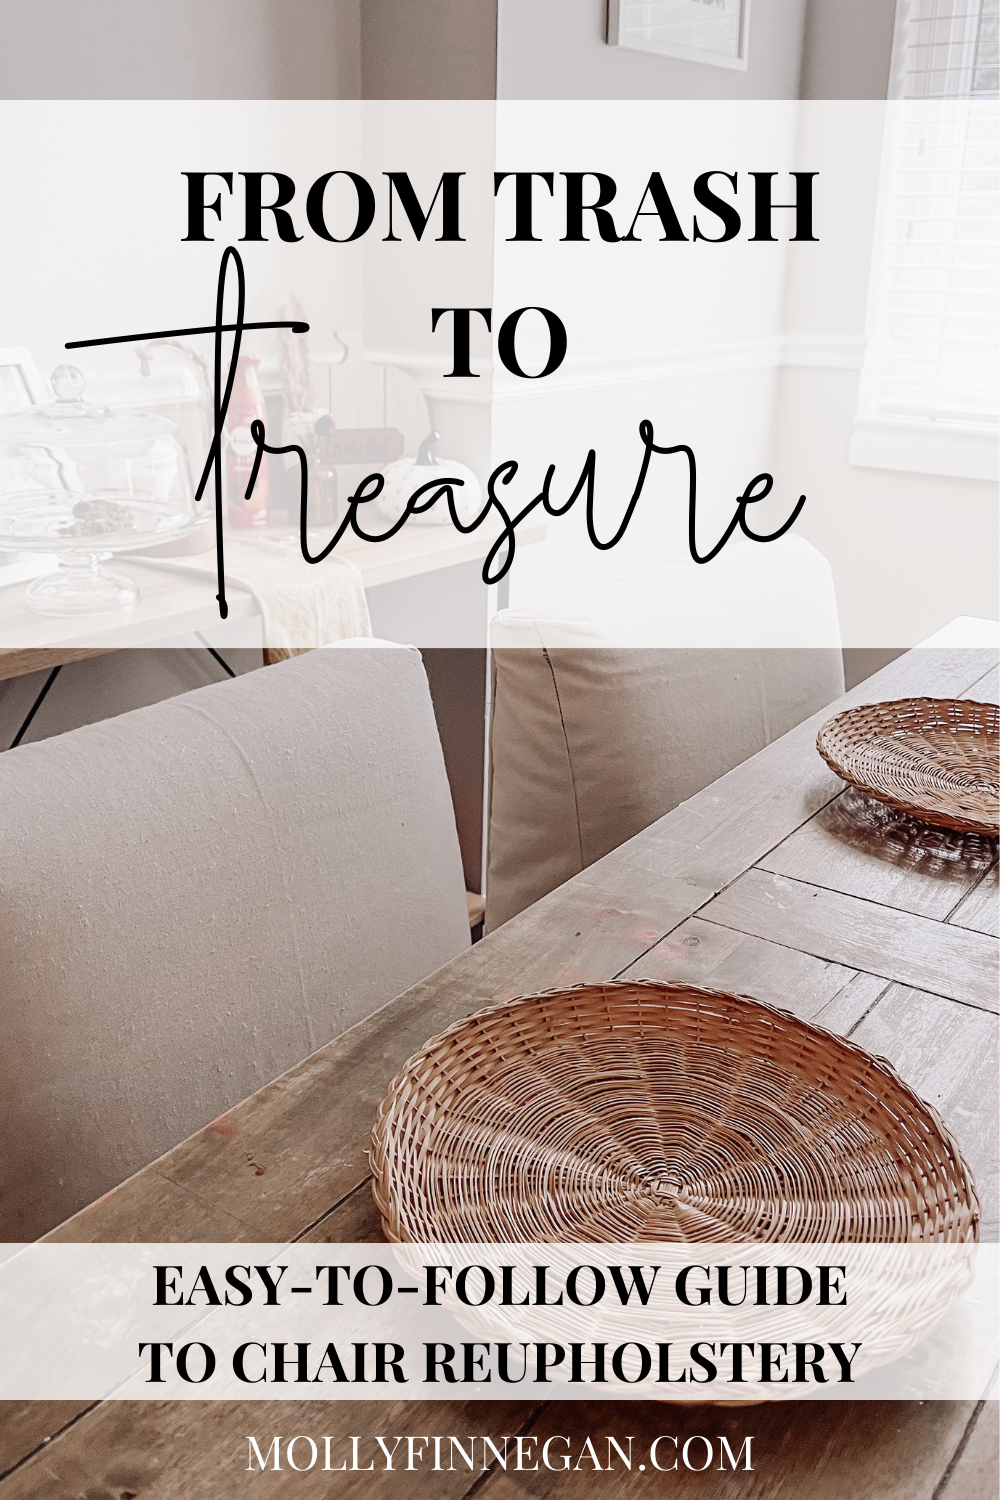 Boho Farmhouse Table and Chairs with Title "From Trash to Treasure | Easy-to-Follow Guide to Chair Reupholstery"